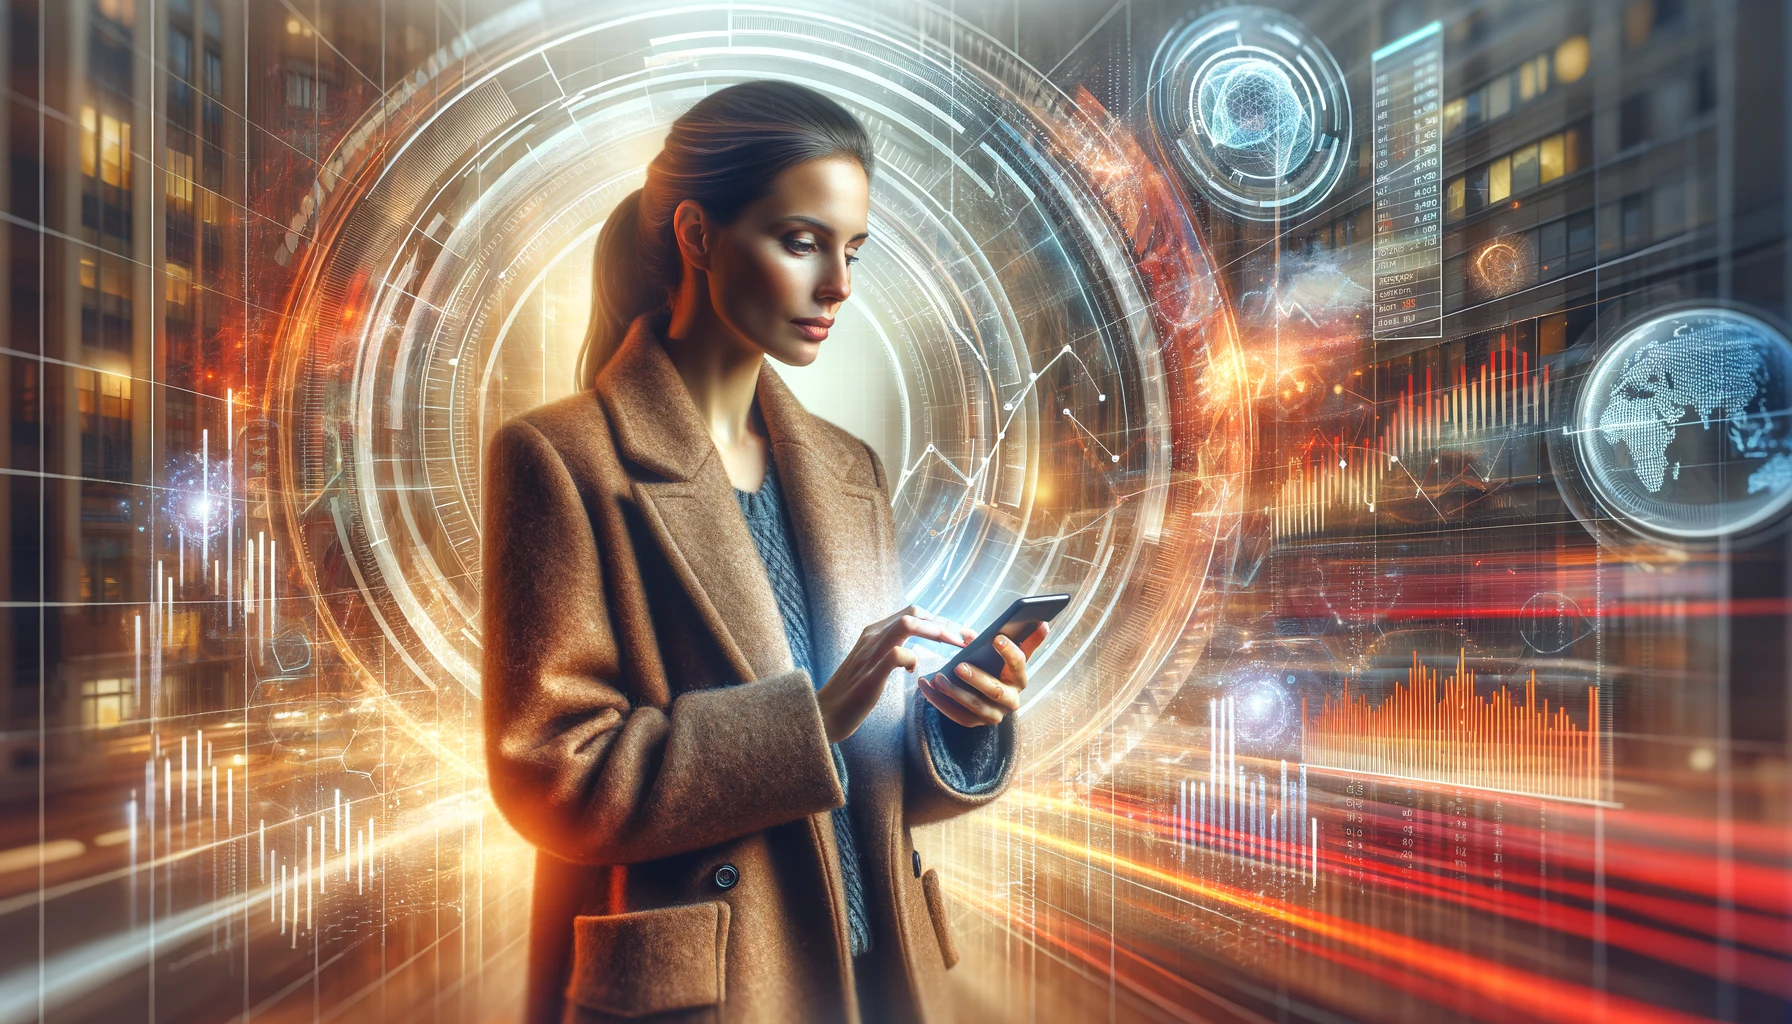 The image features a businesswoman using a smartphone with a vibrant, futuristic financial graph overlay in the background.